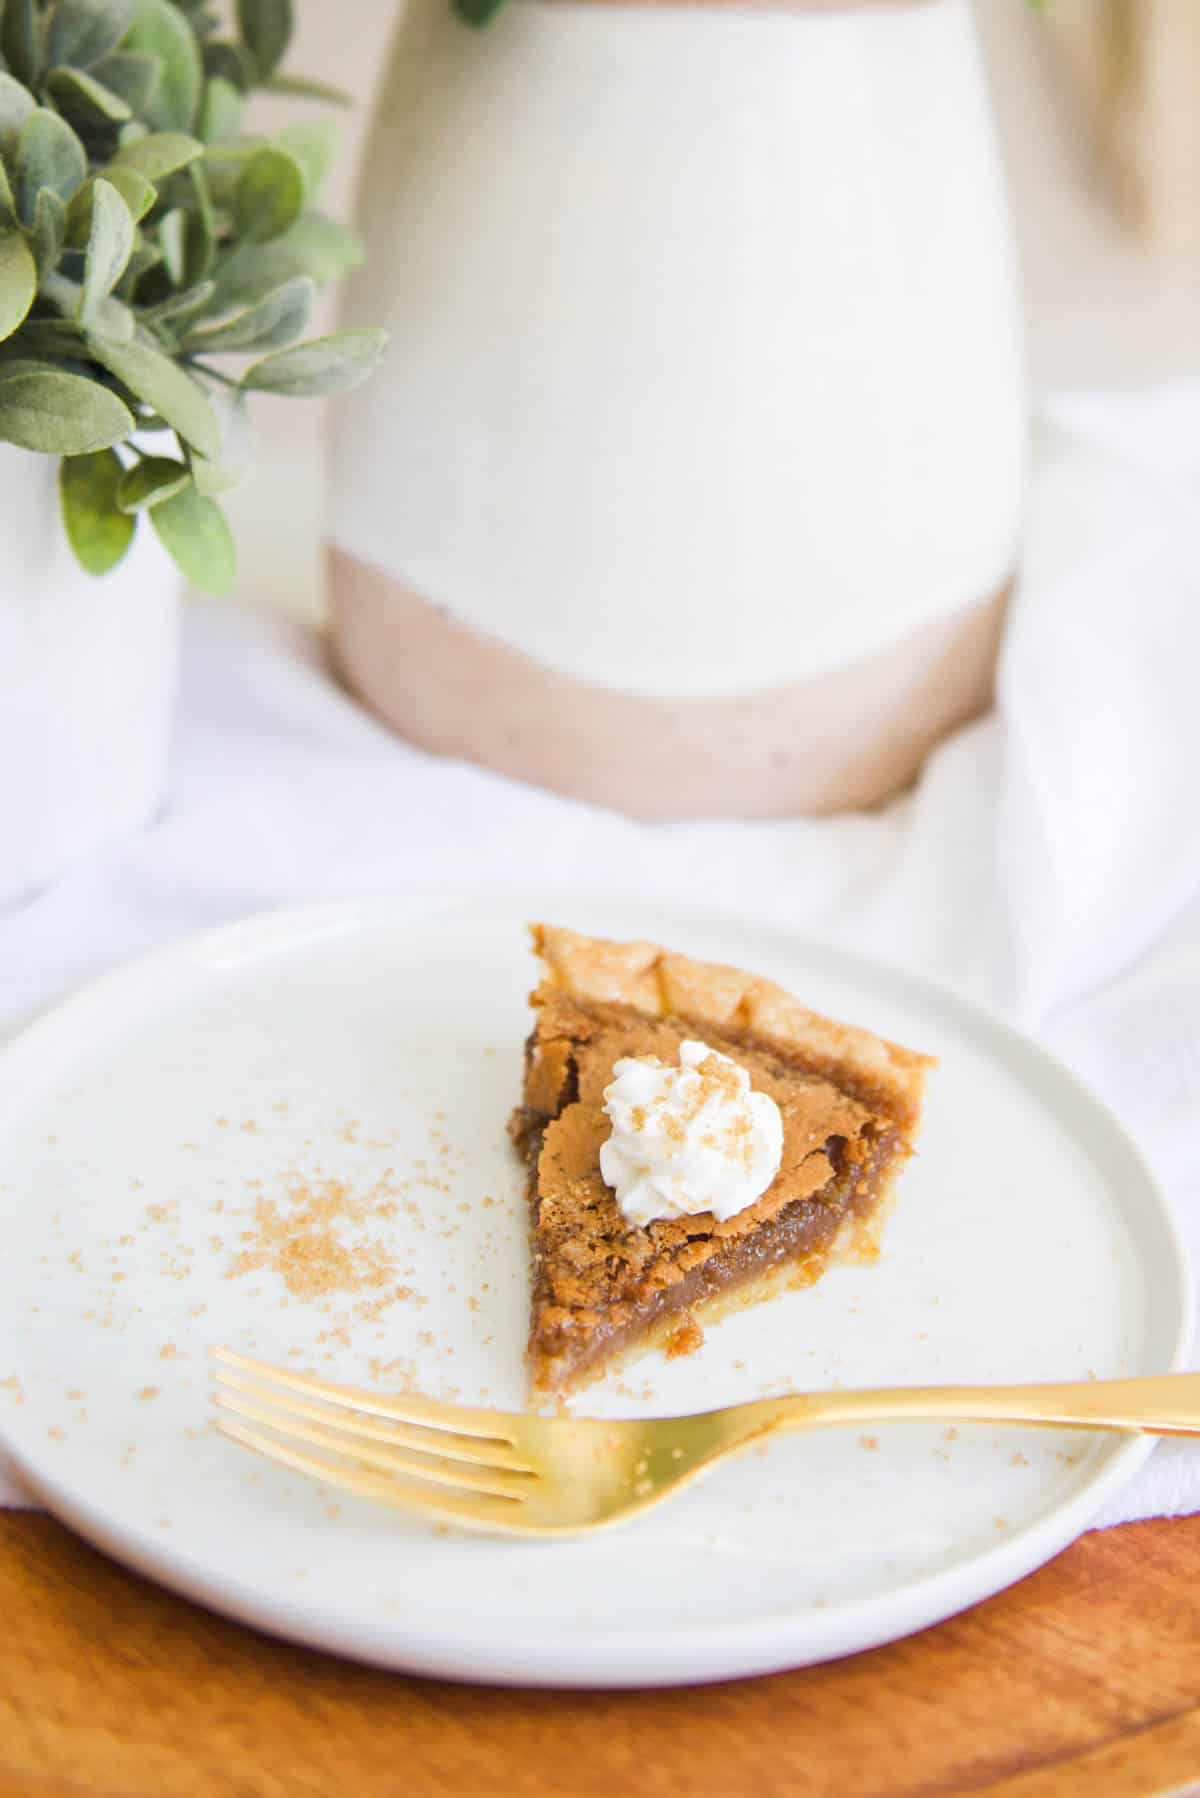 A slice of Brown Sugar Pie on a plate topped with whipped cream.